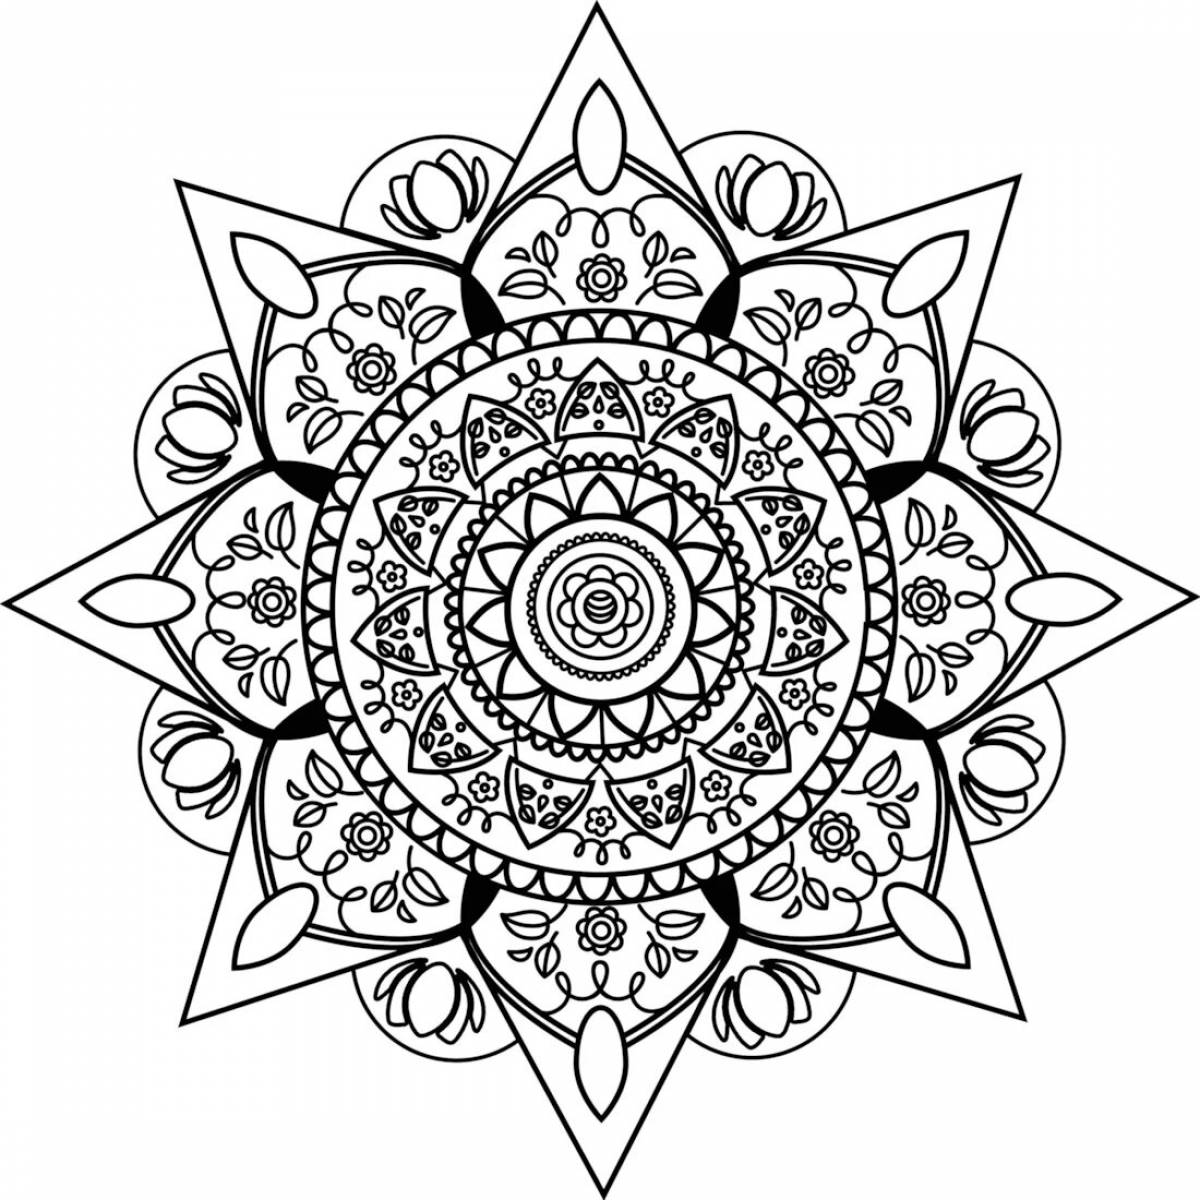 Artistic coloring meaning of the mandala